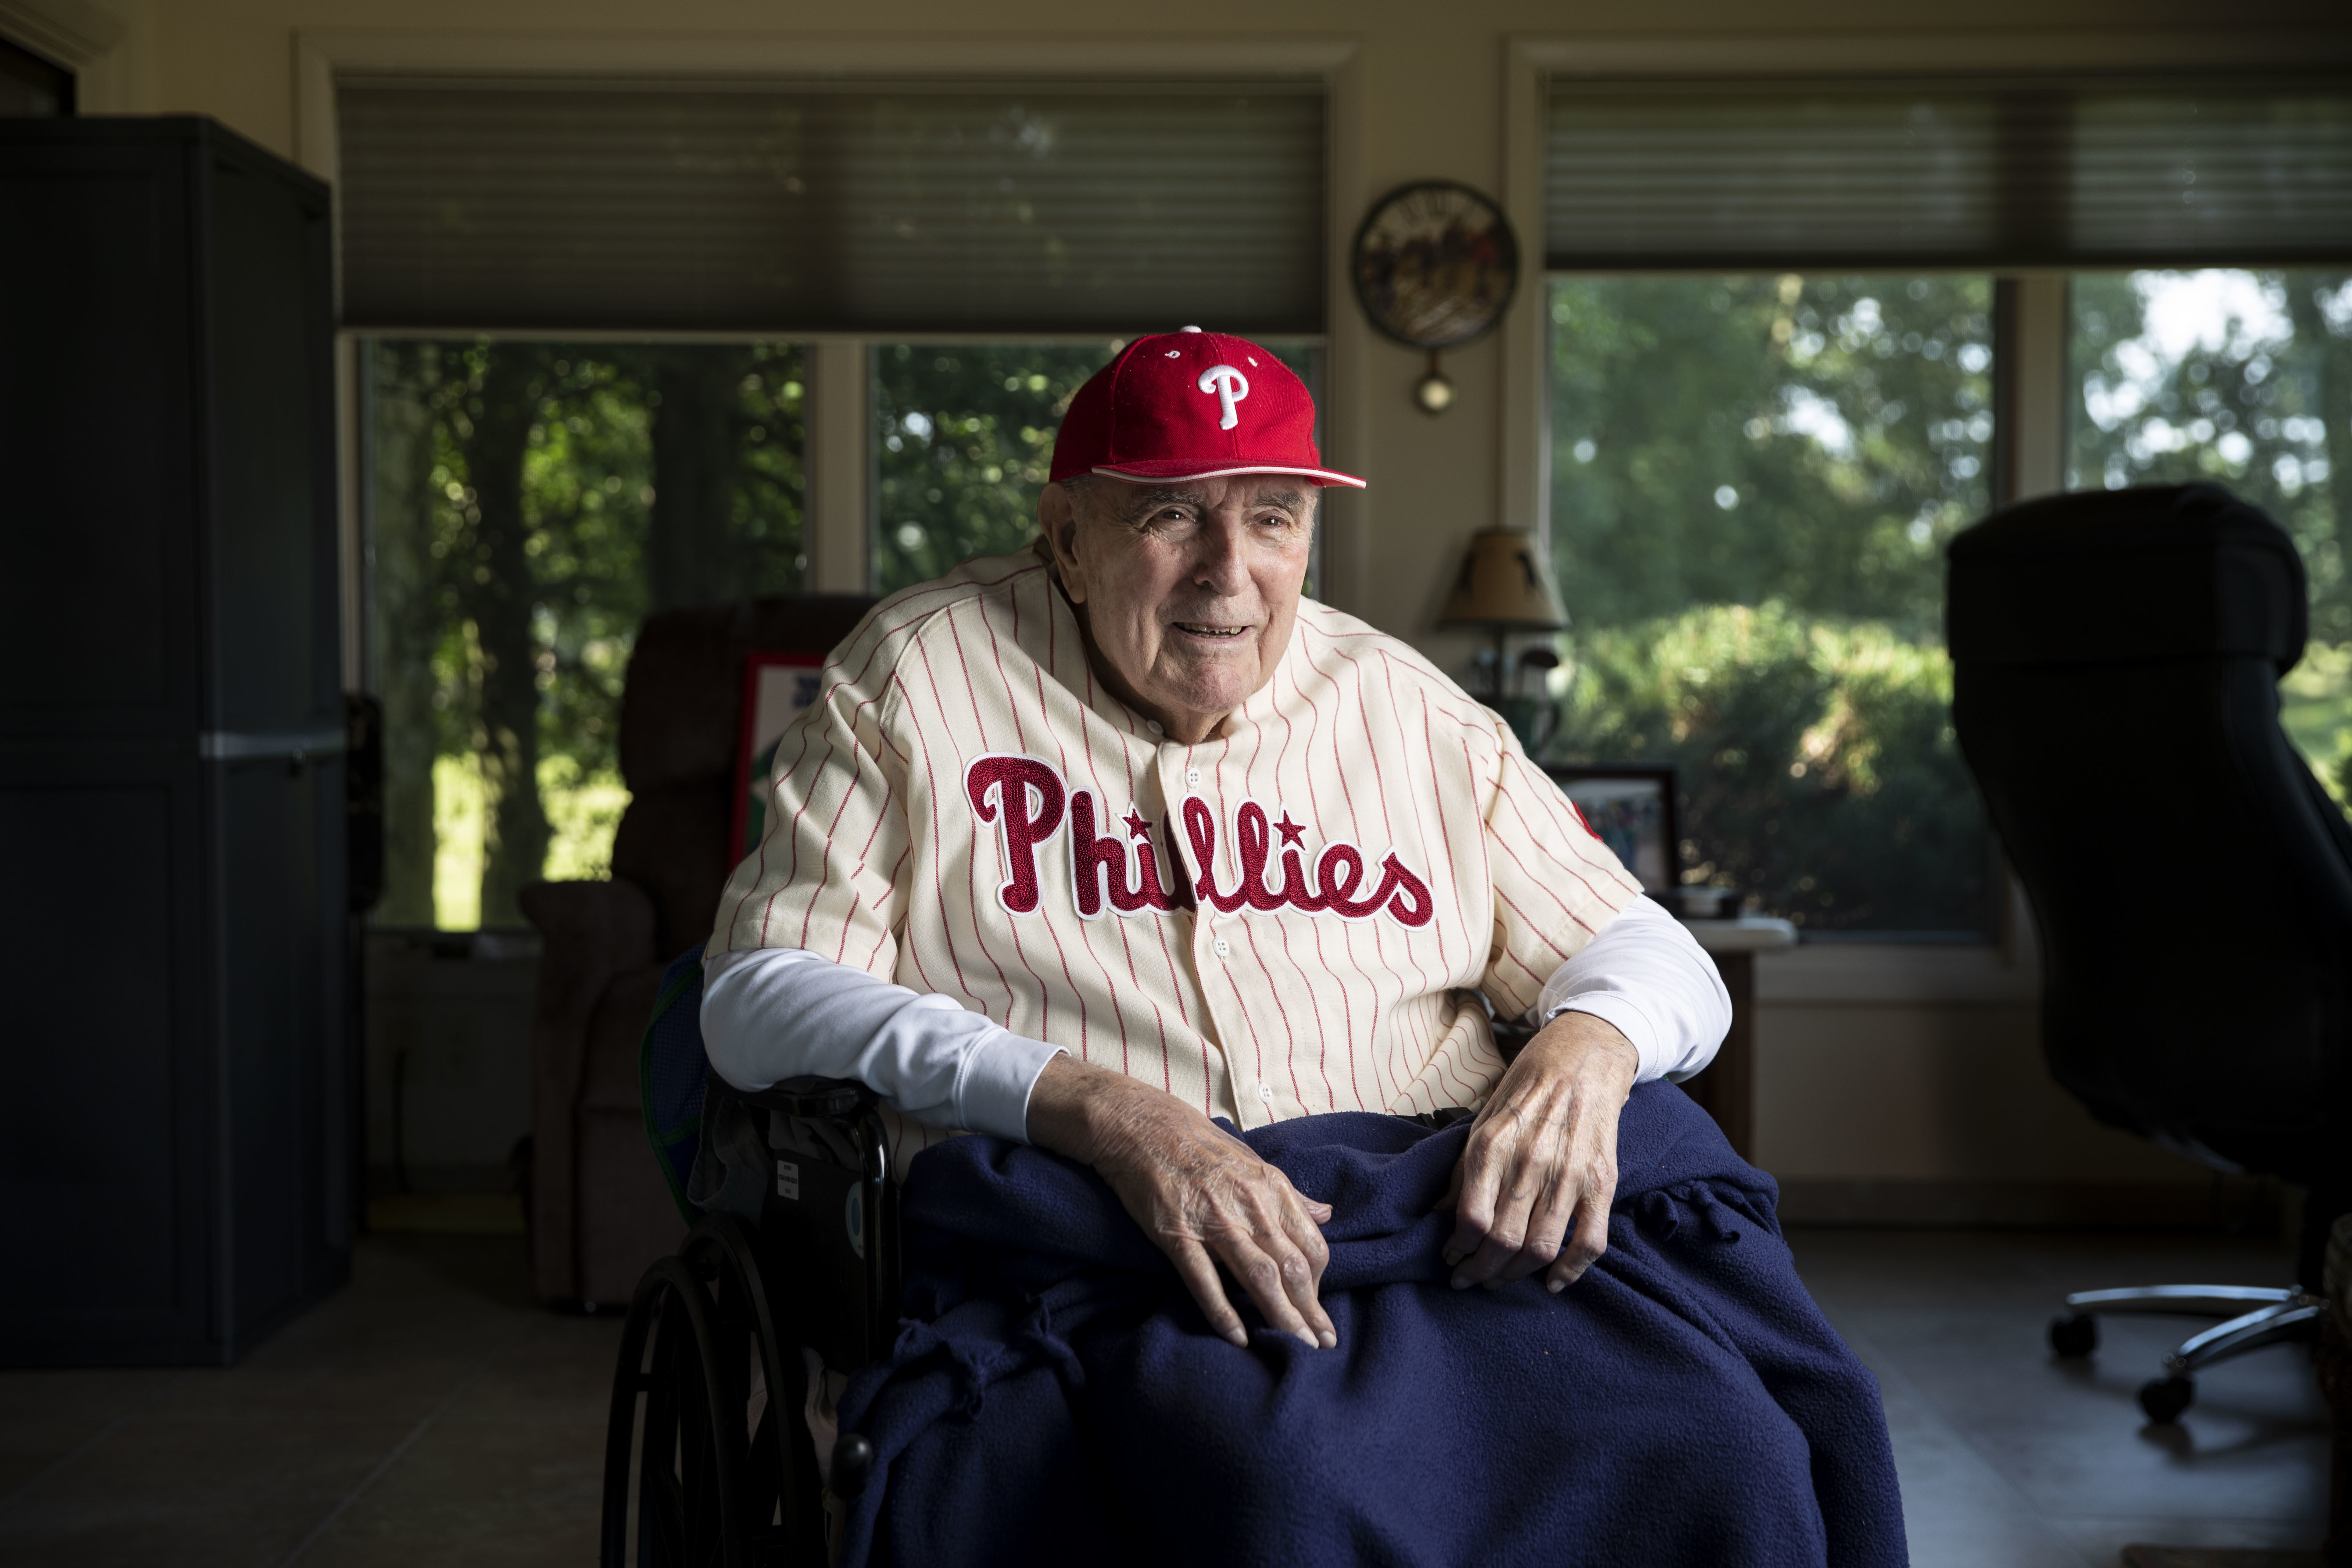 Whiz Kids cast a spell on Phillies fans that endures 60 years later